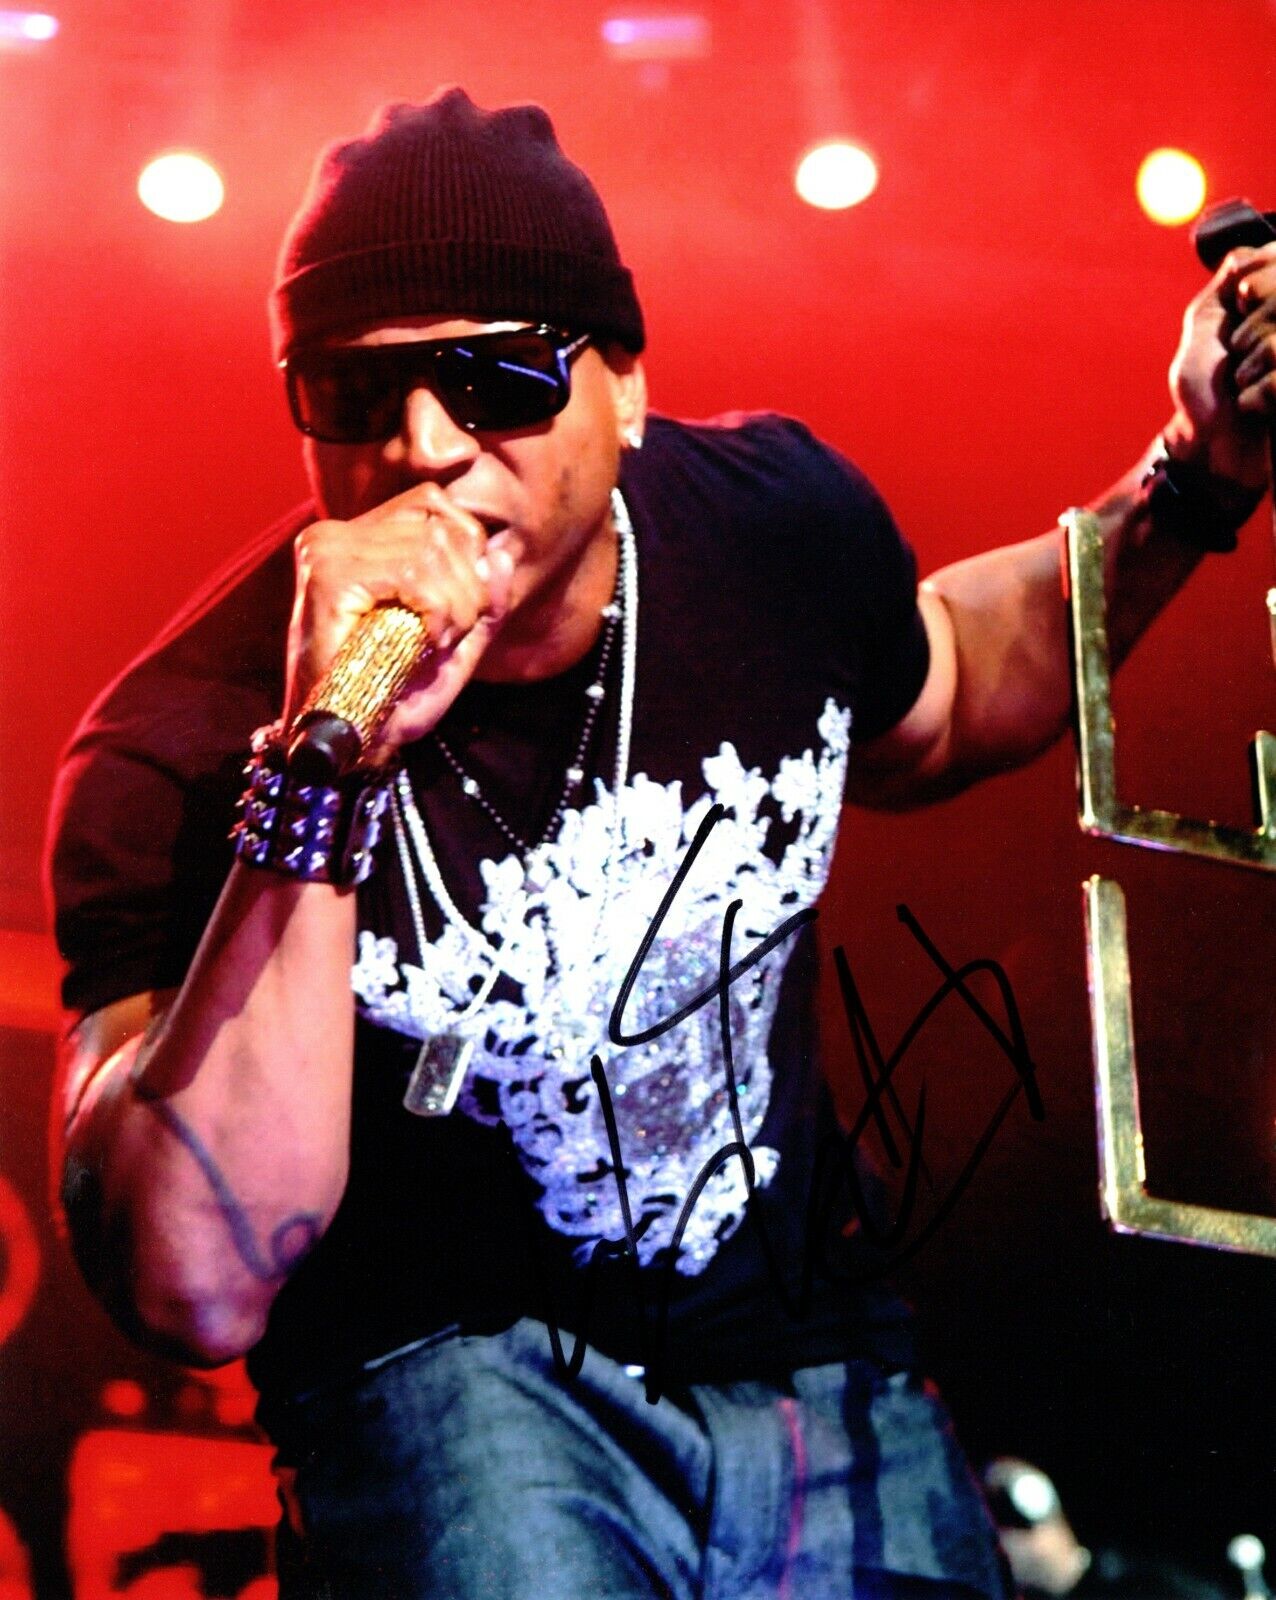 LL Cool J Signed - Autographed Raper - NCIS Actor 8x10 inch Photo Poster painting James Smith